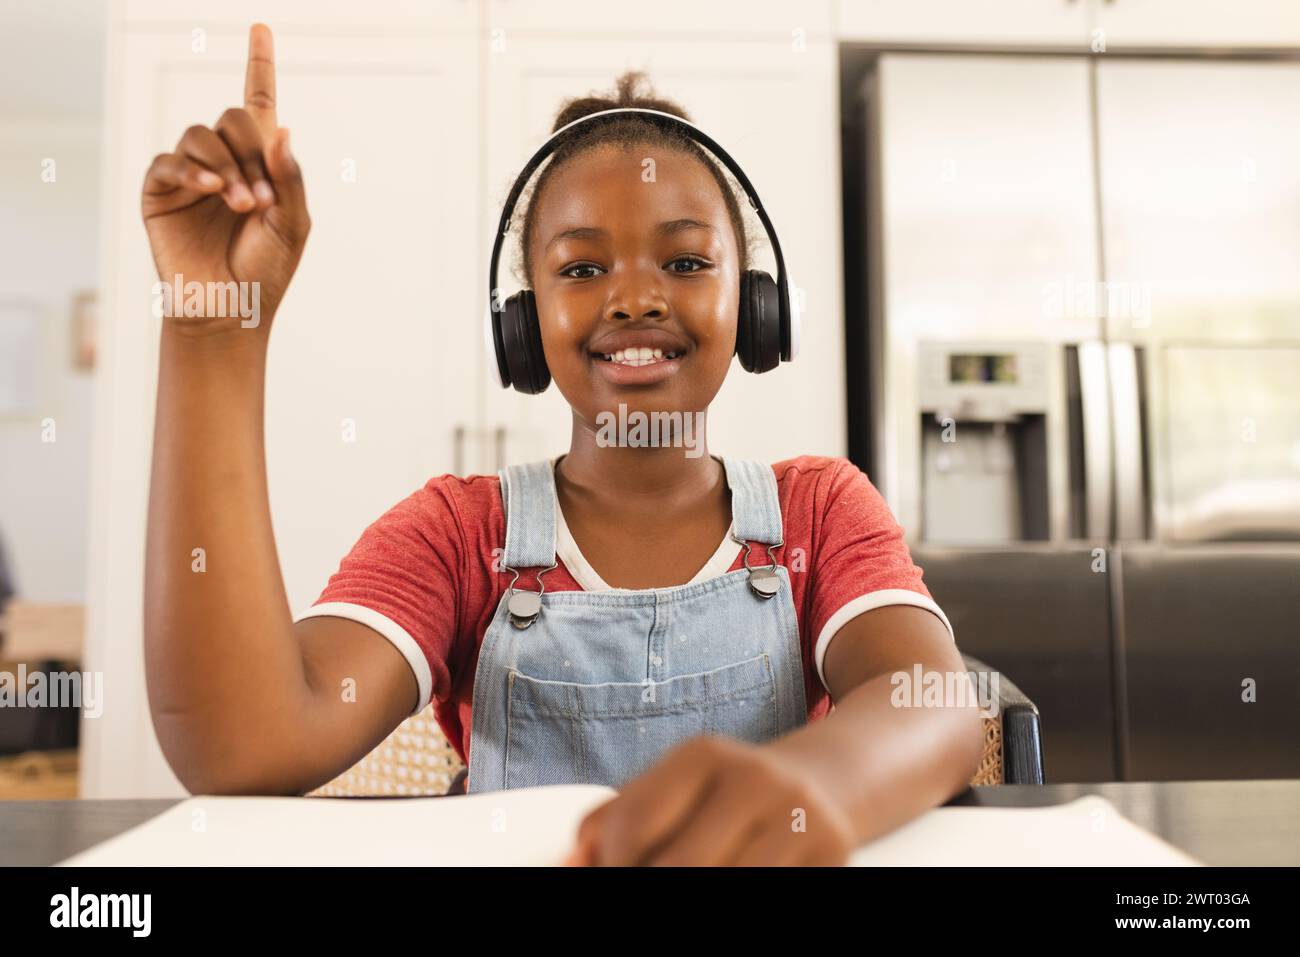 A young African American girl raises her hand during a lesson on a video call online school lesson Stock Photo